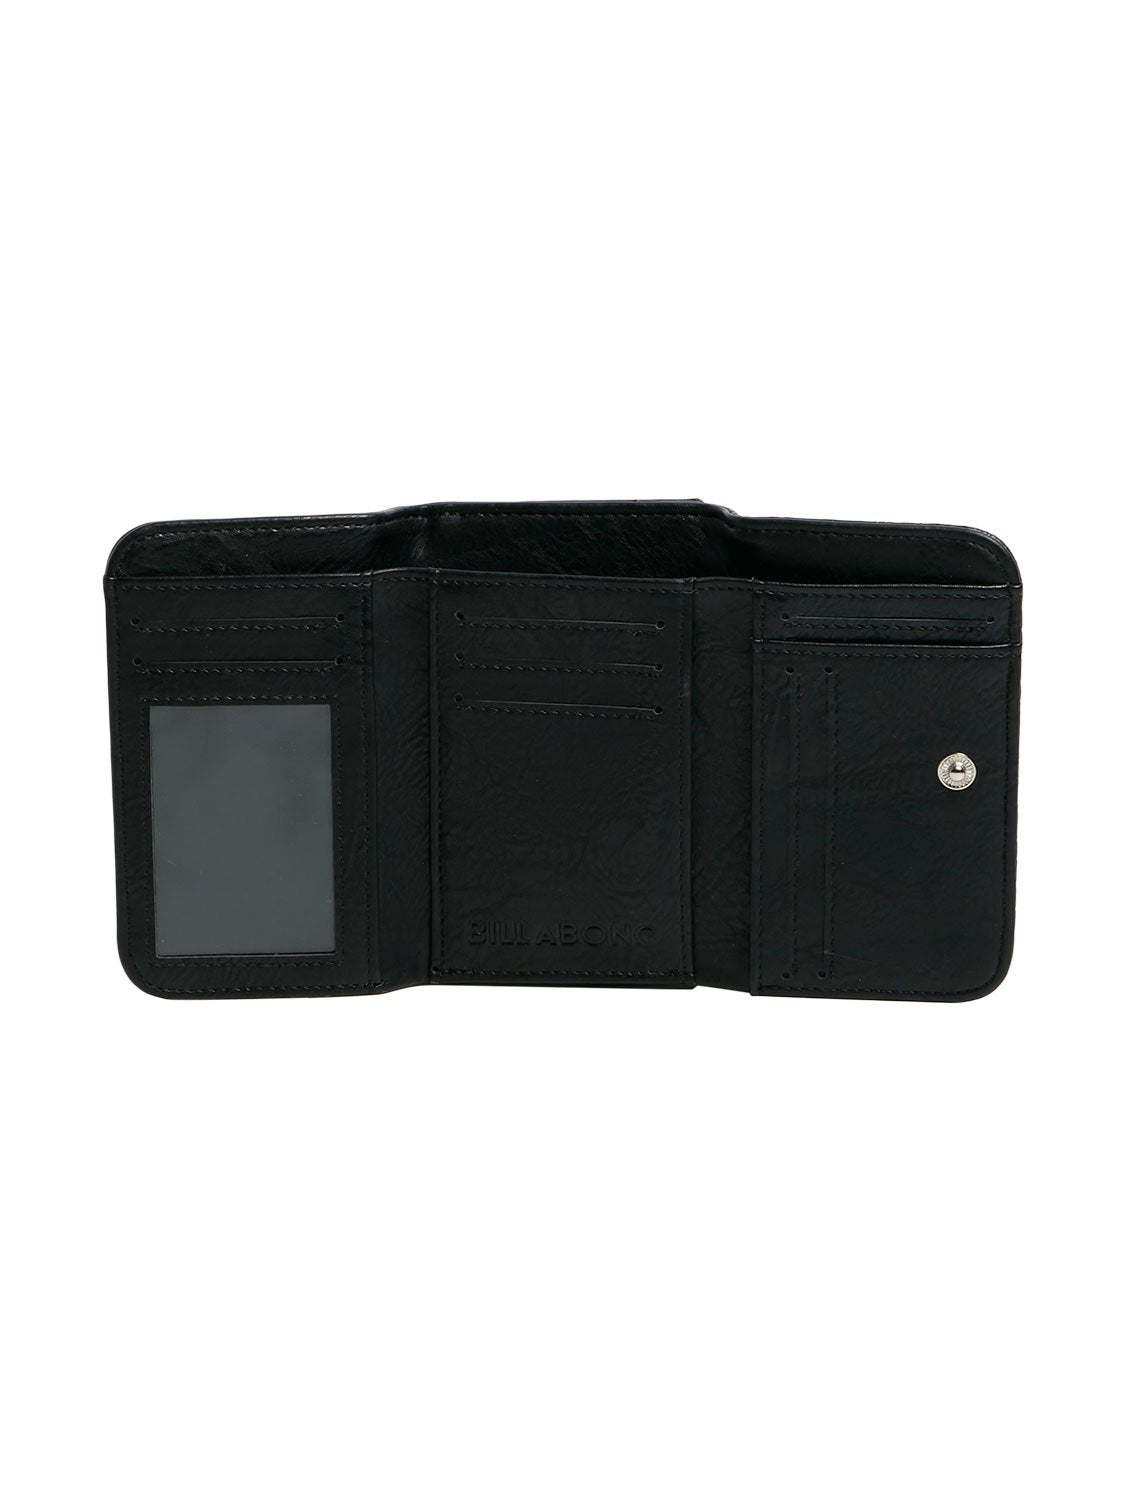 Billabong Ladies On Vacation Trifold Wallet